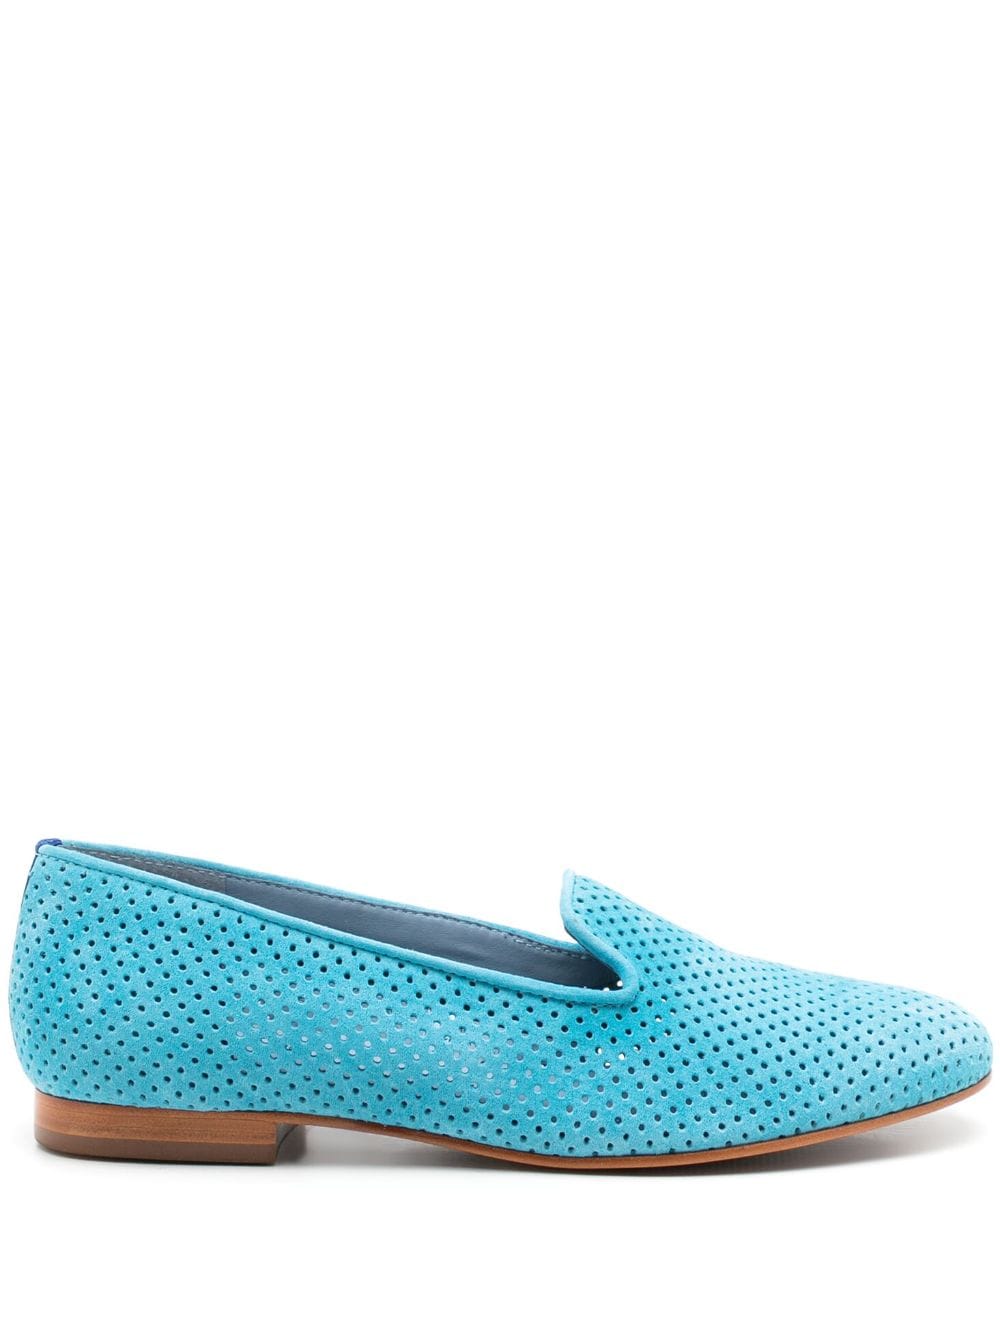 Blue Bird Shoes perforated leather loafers von Blue Bird Shoes